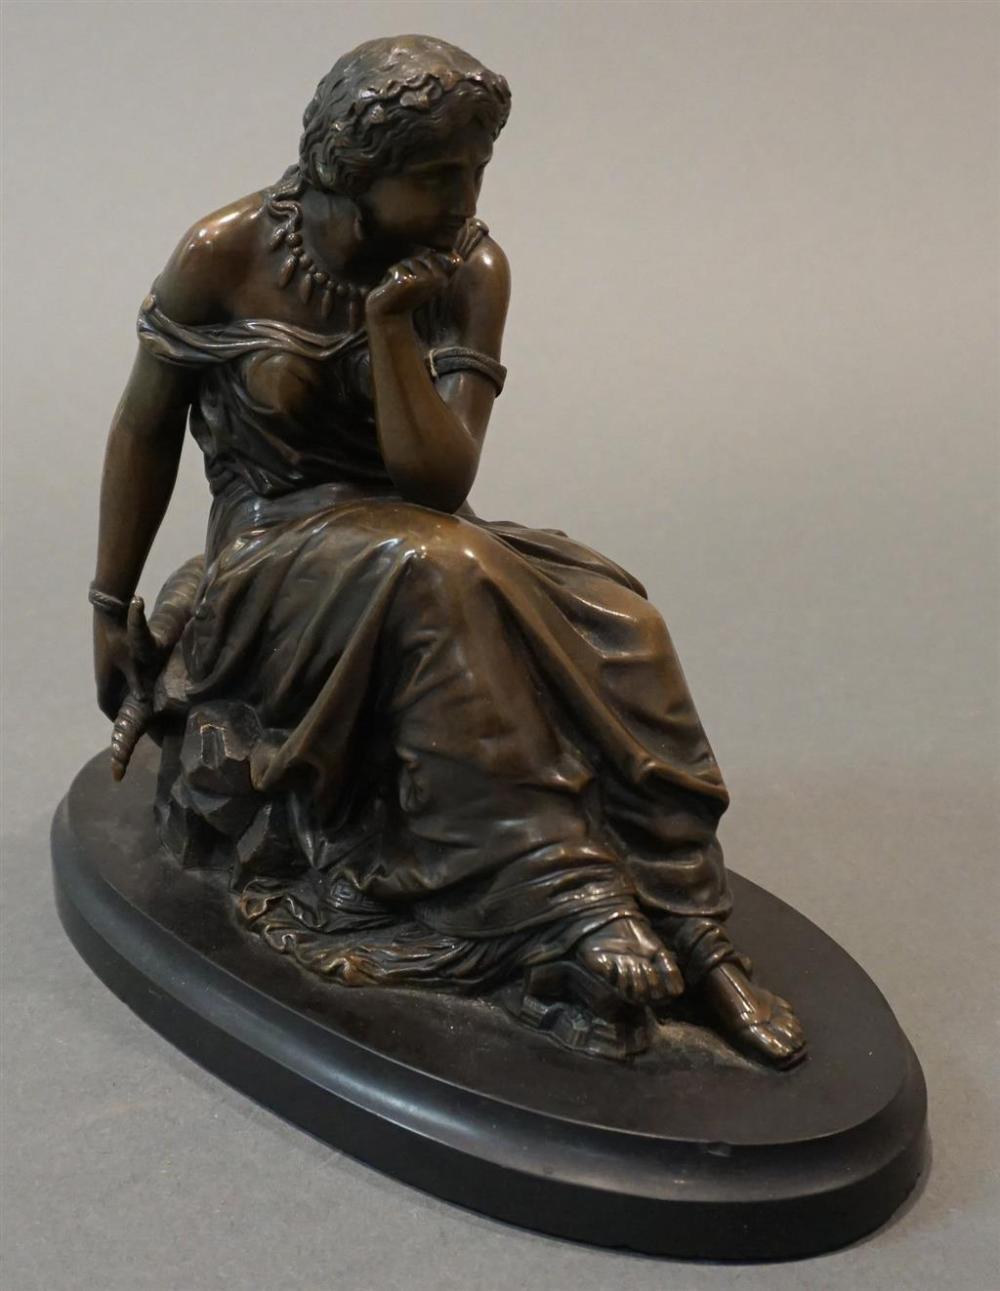 BRONZE FIGURE OF A WOMAN HOLDING